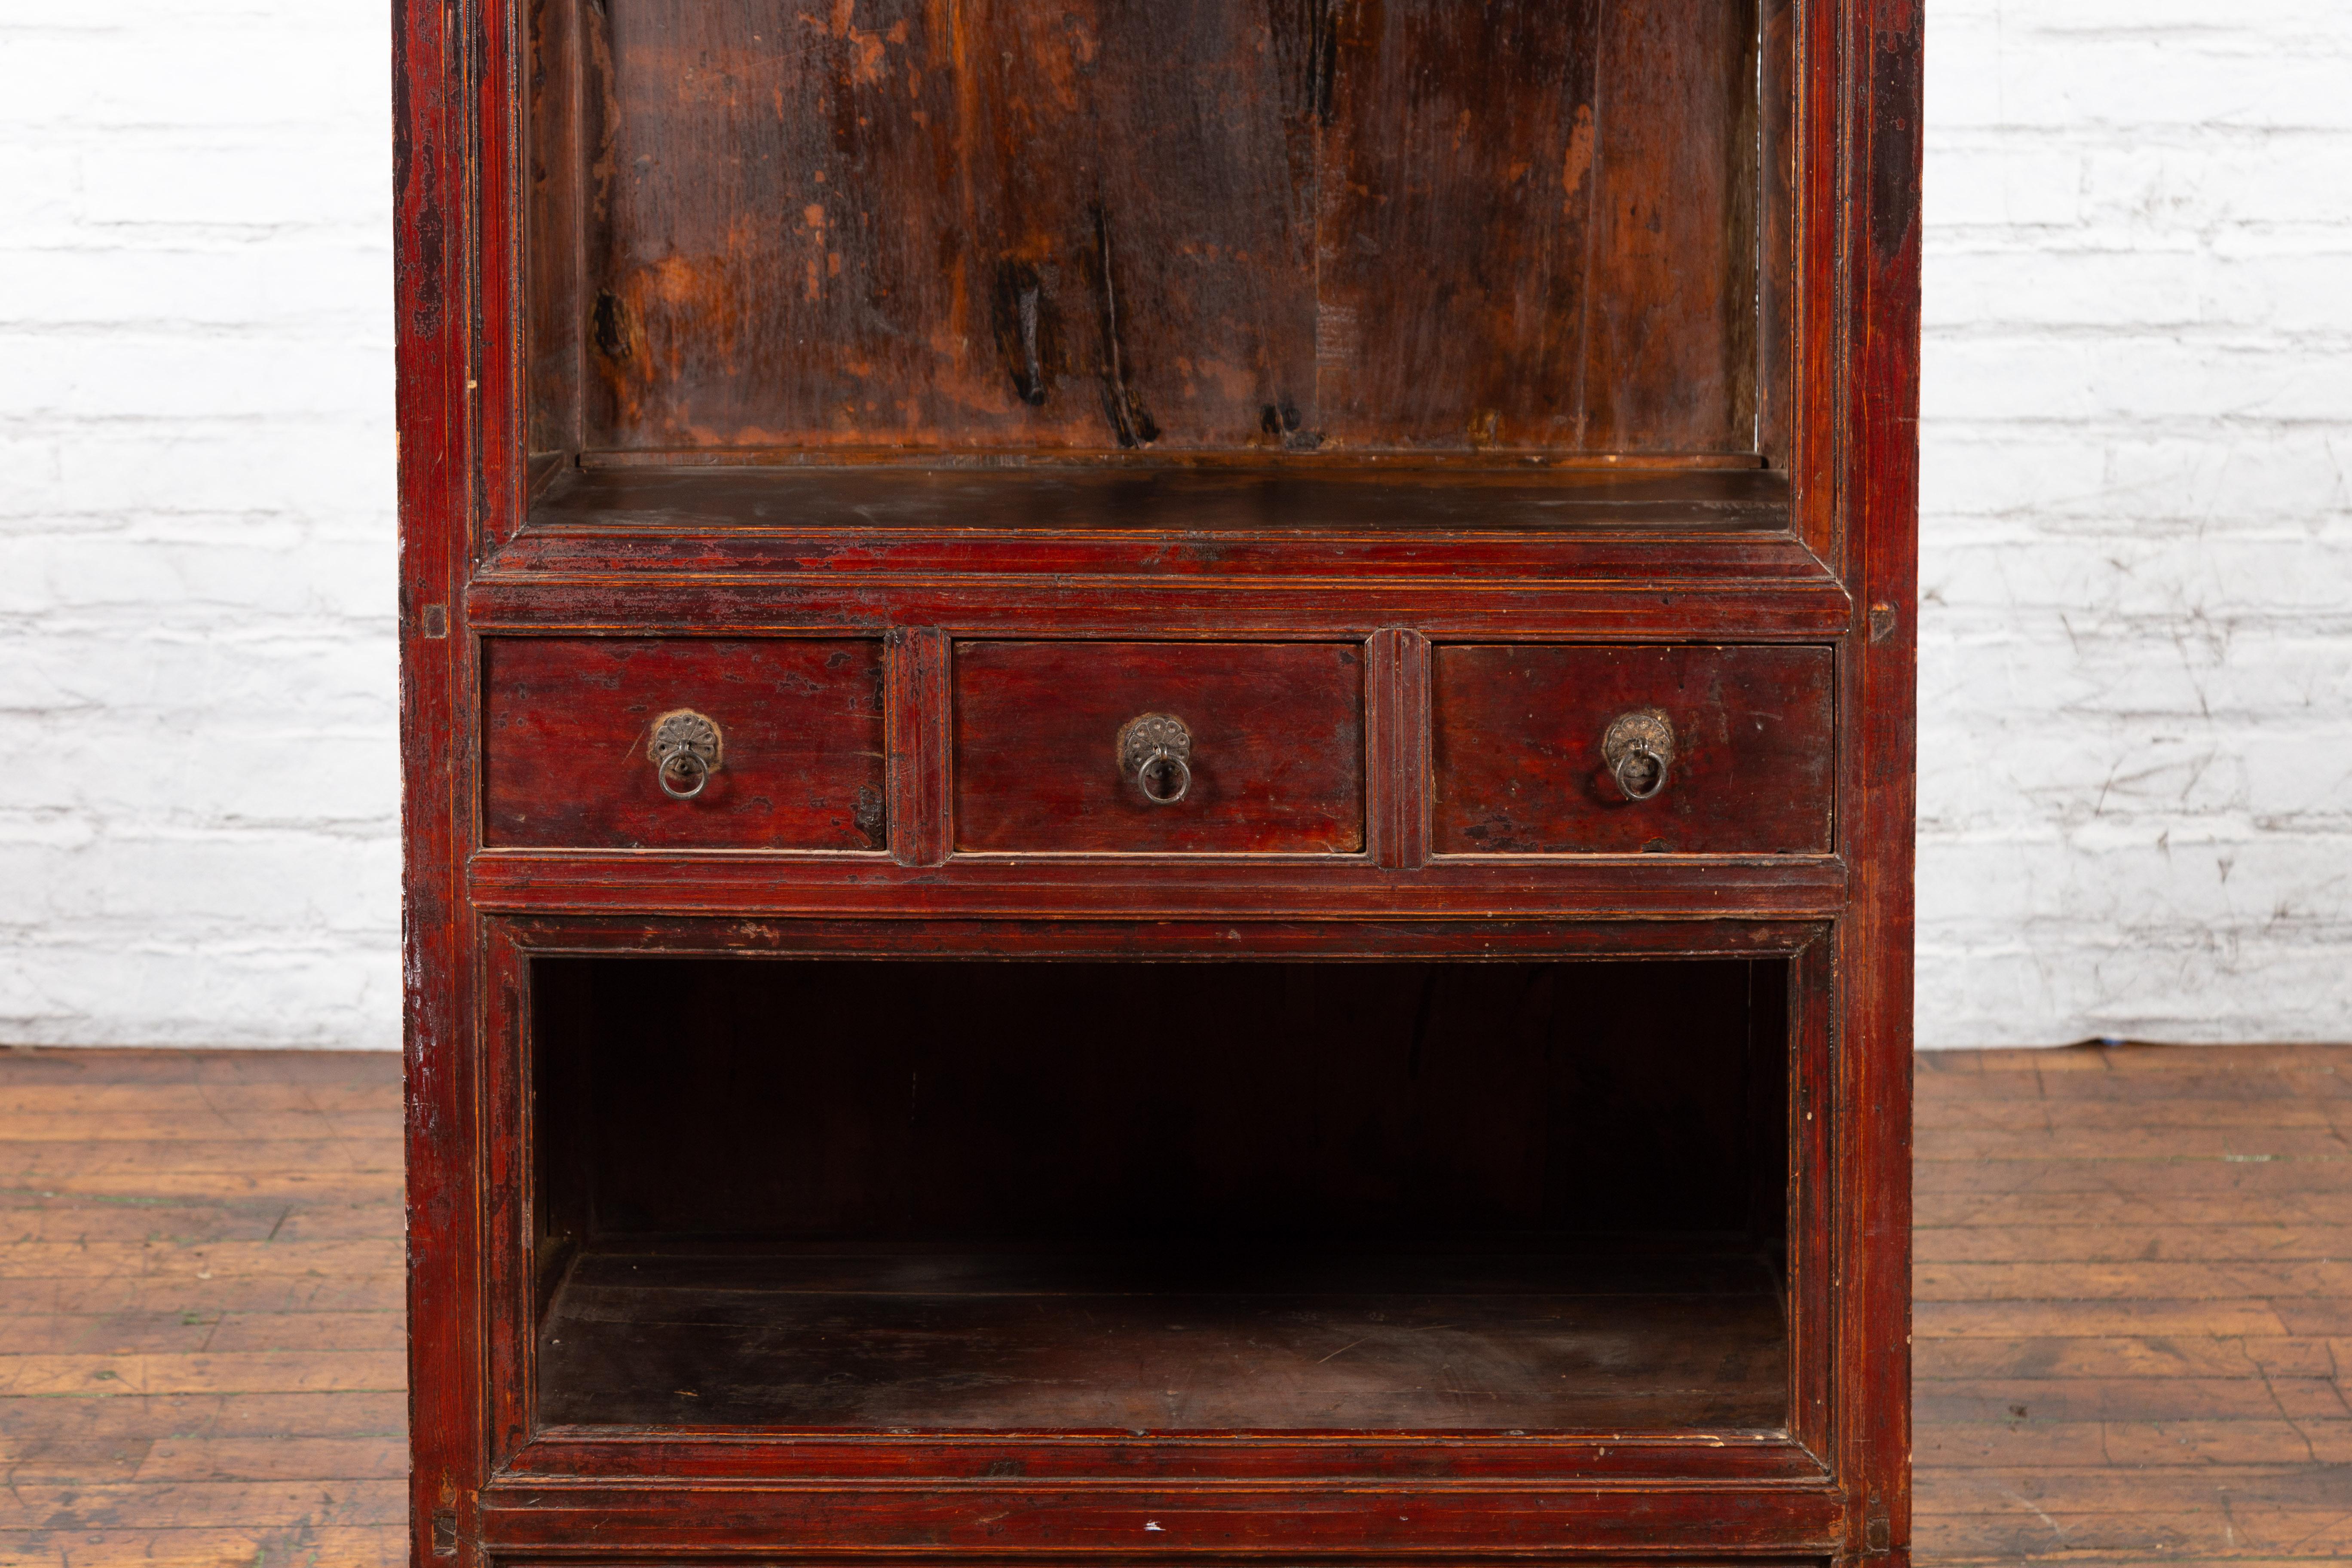 Chinese Qing Dynasty 19th Century Lacquered Cabinet with Carved Dragon Motifs For Sale 2